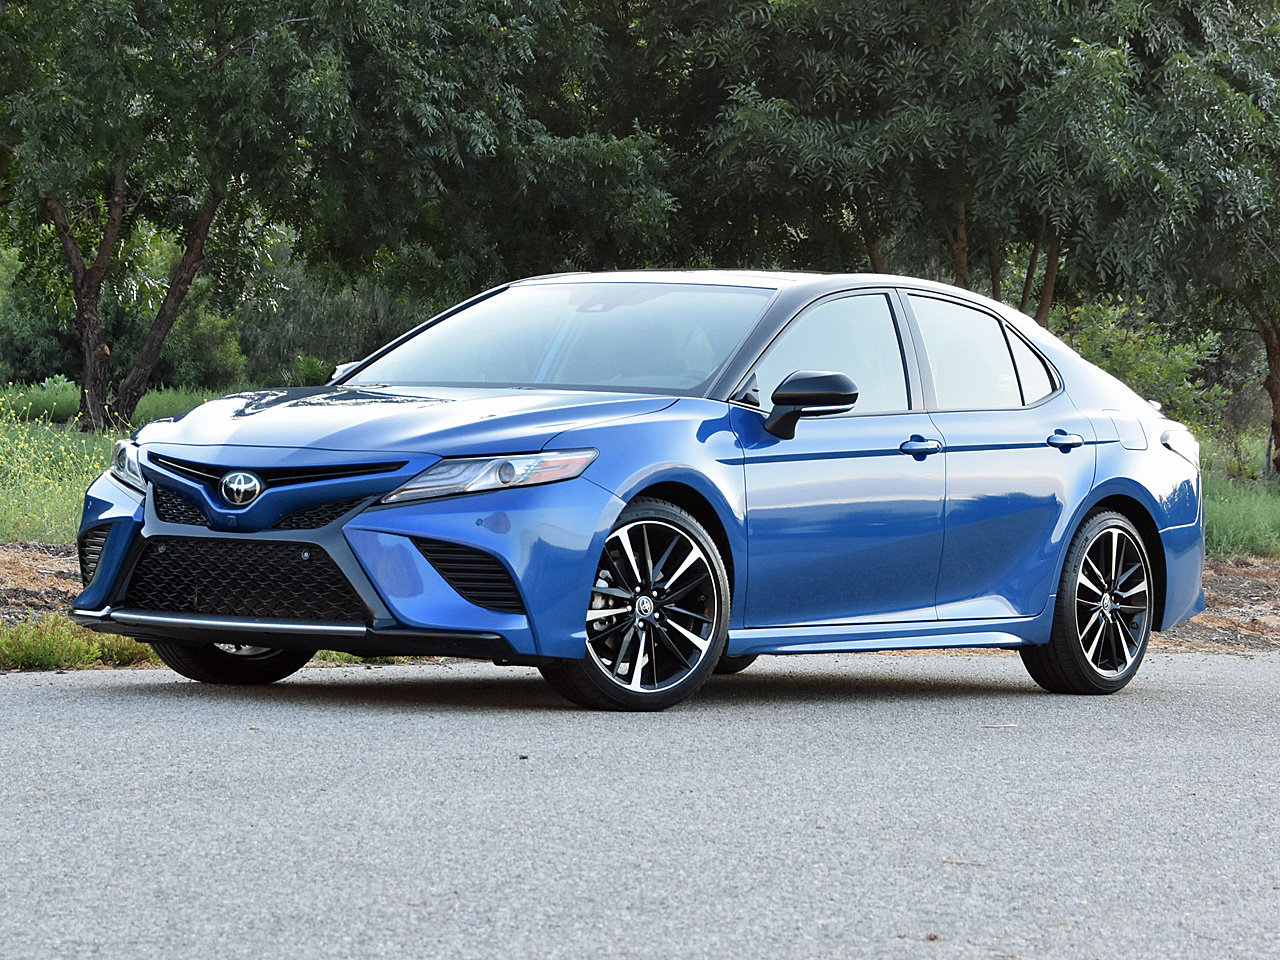 Video Review: 2019 Toyota Camry Expert Test Drive - CarGurus